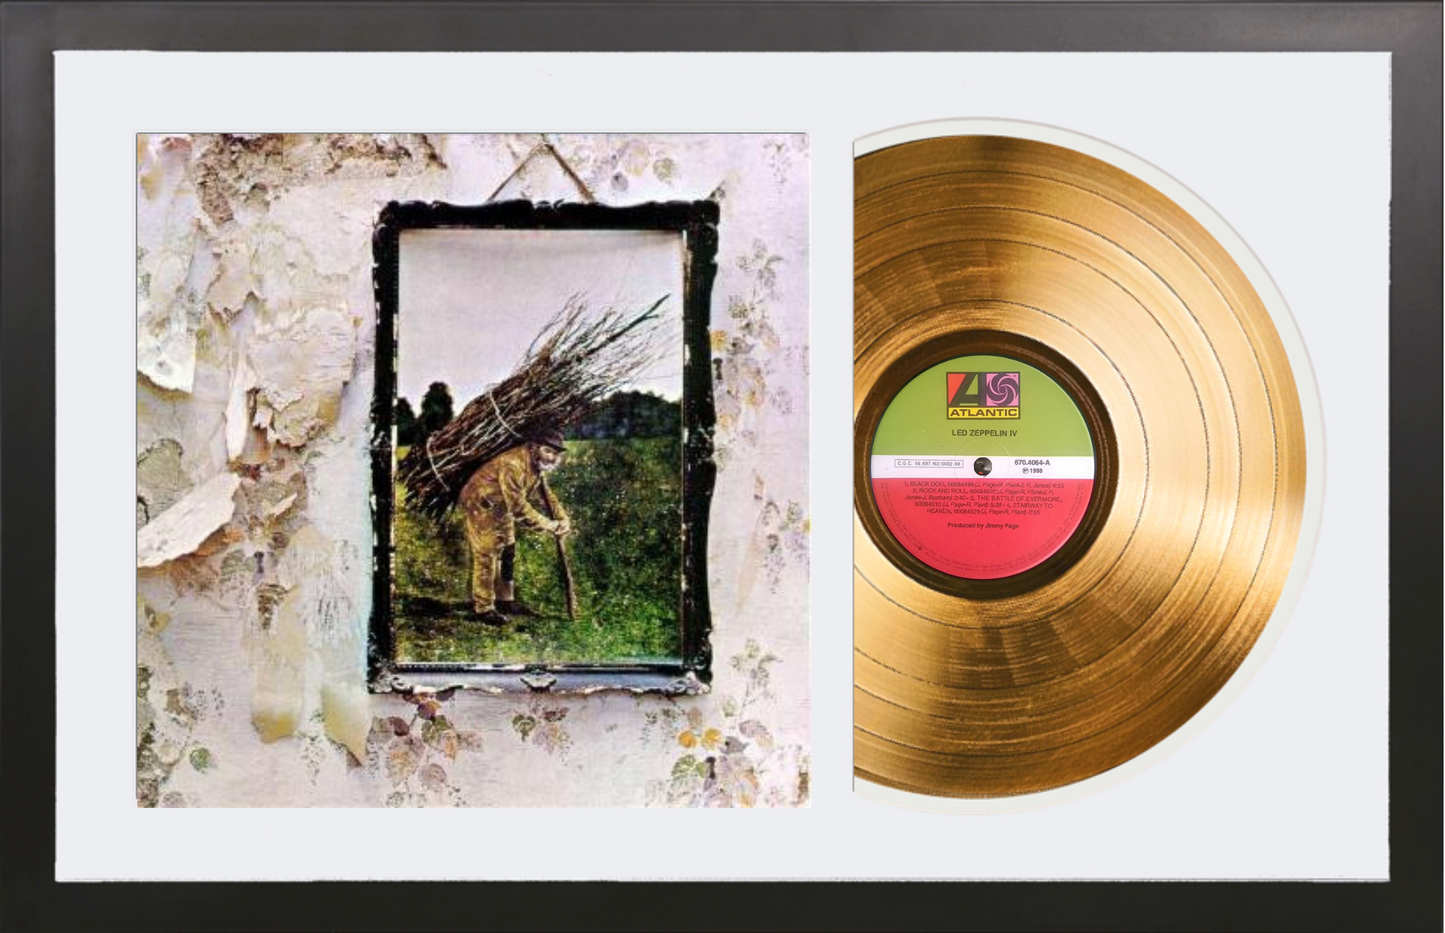 Led Zeppelin - IV - 14K Gold Plated, Limited Edition Album